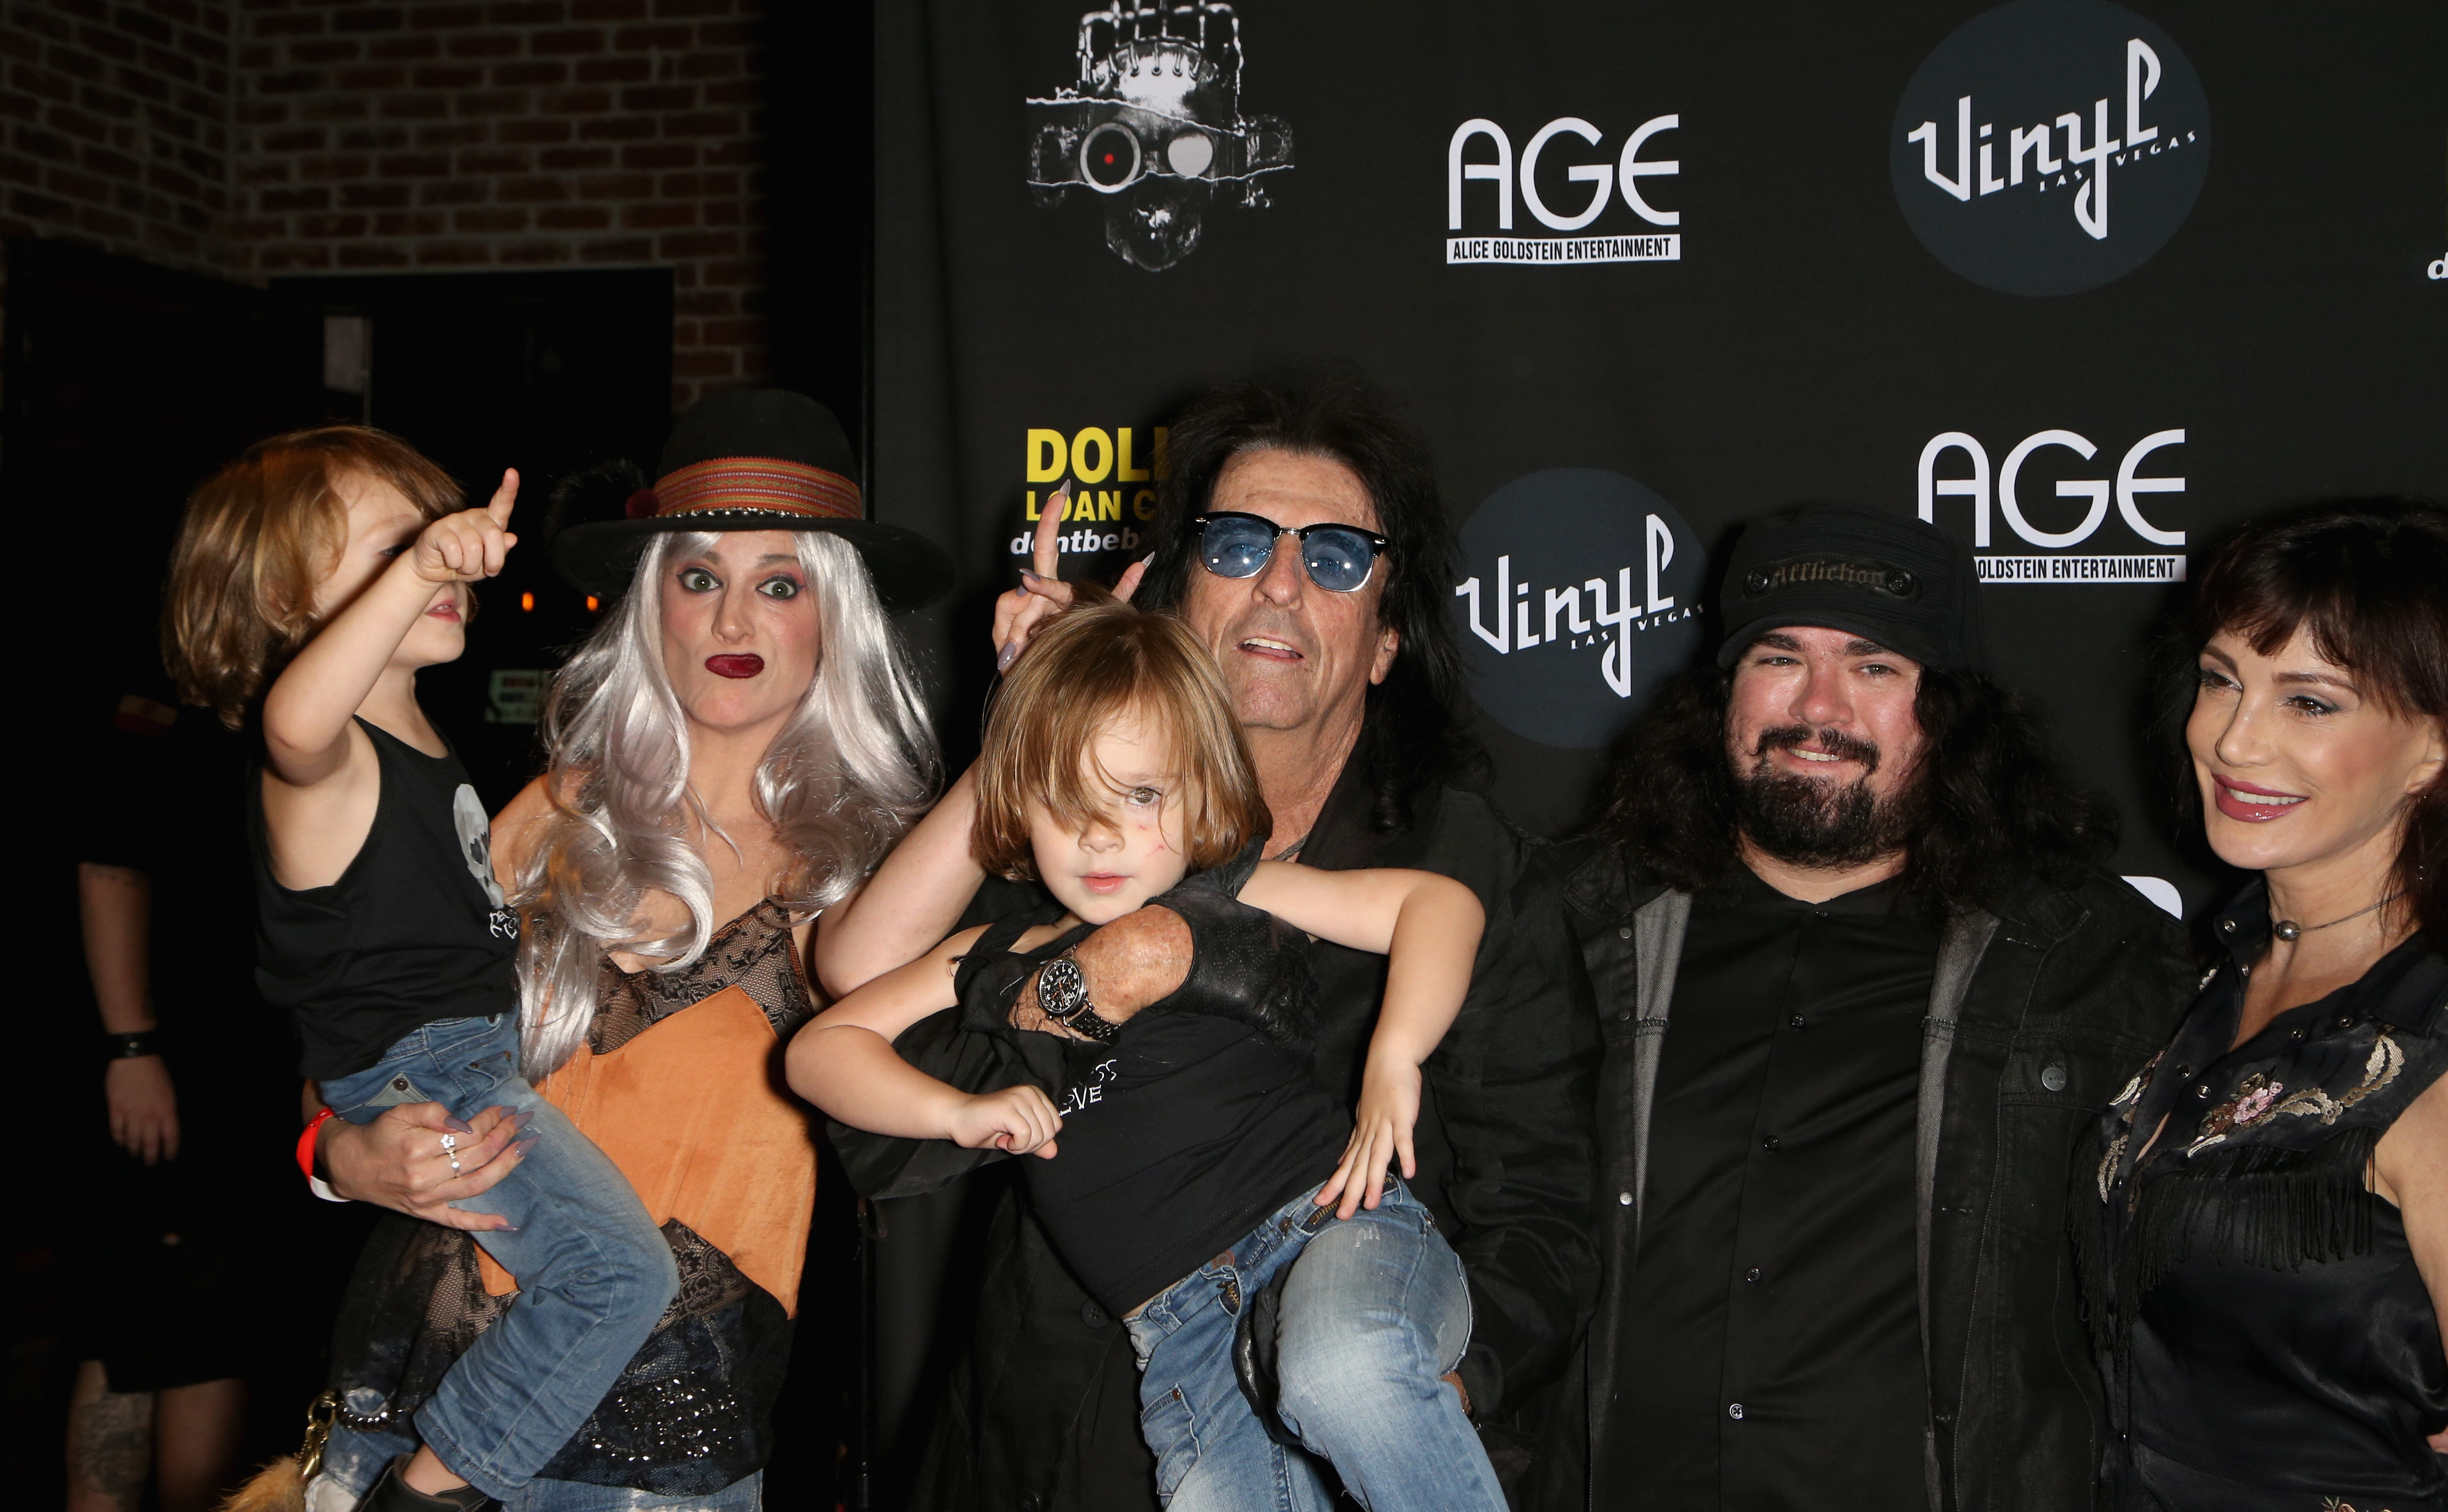 (L-R) Falcon Cooper, Calico Cooper, Riot Cooper, Alice Cooper, Dash Cooper, and Sheryl Cooper attend a CD release party for CO-OP at Vinyl inside the Hard Rock Hotel & Casino, on August 9, 2018, in Las Vegas, Nevada.| Source: Getty Images